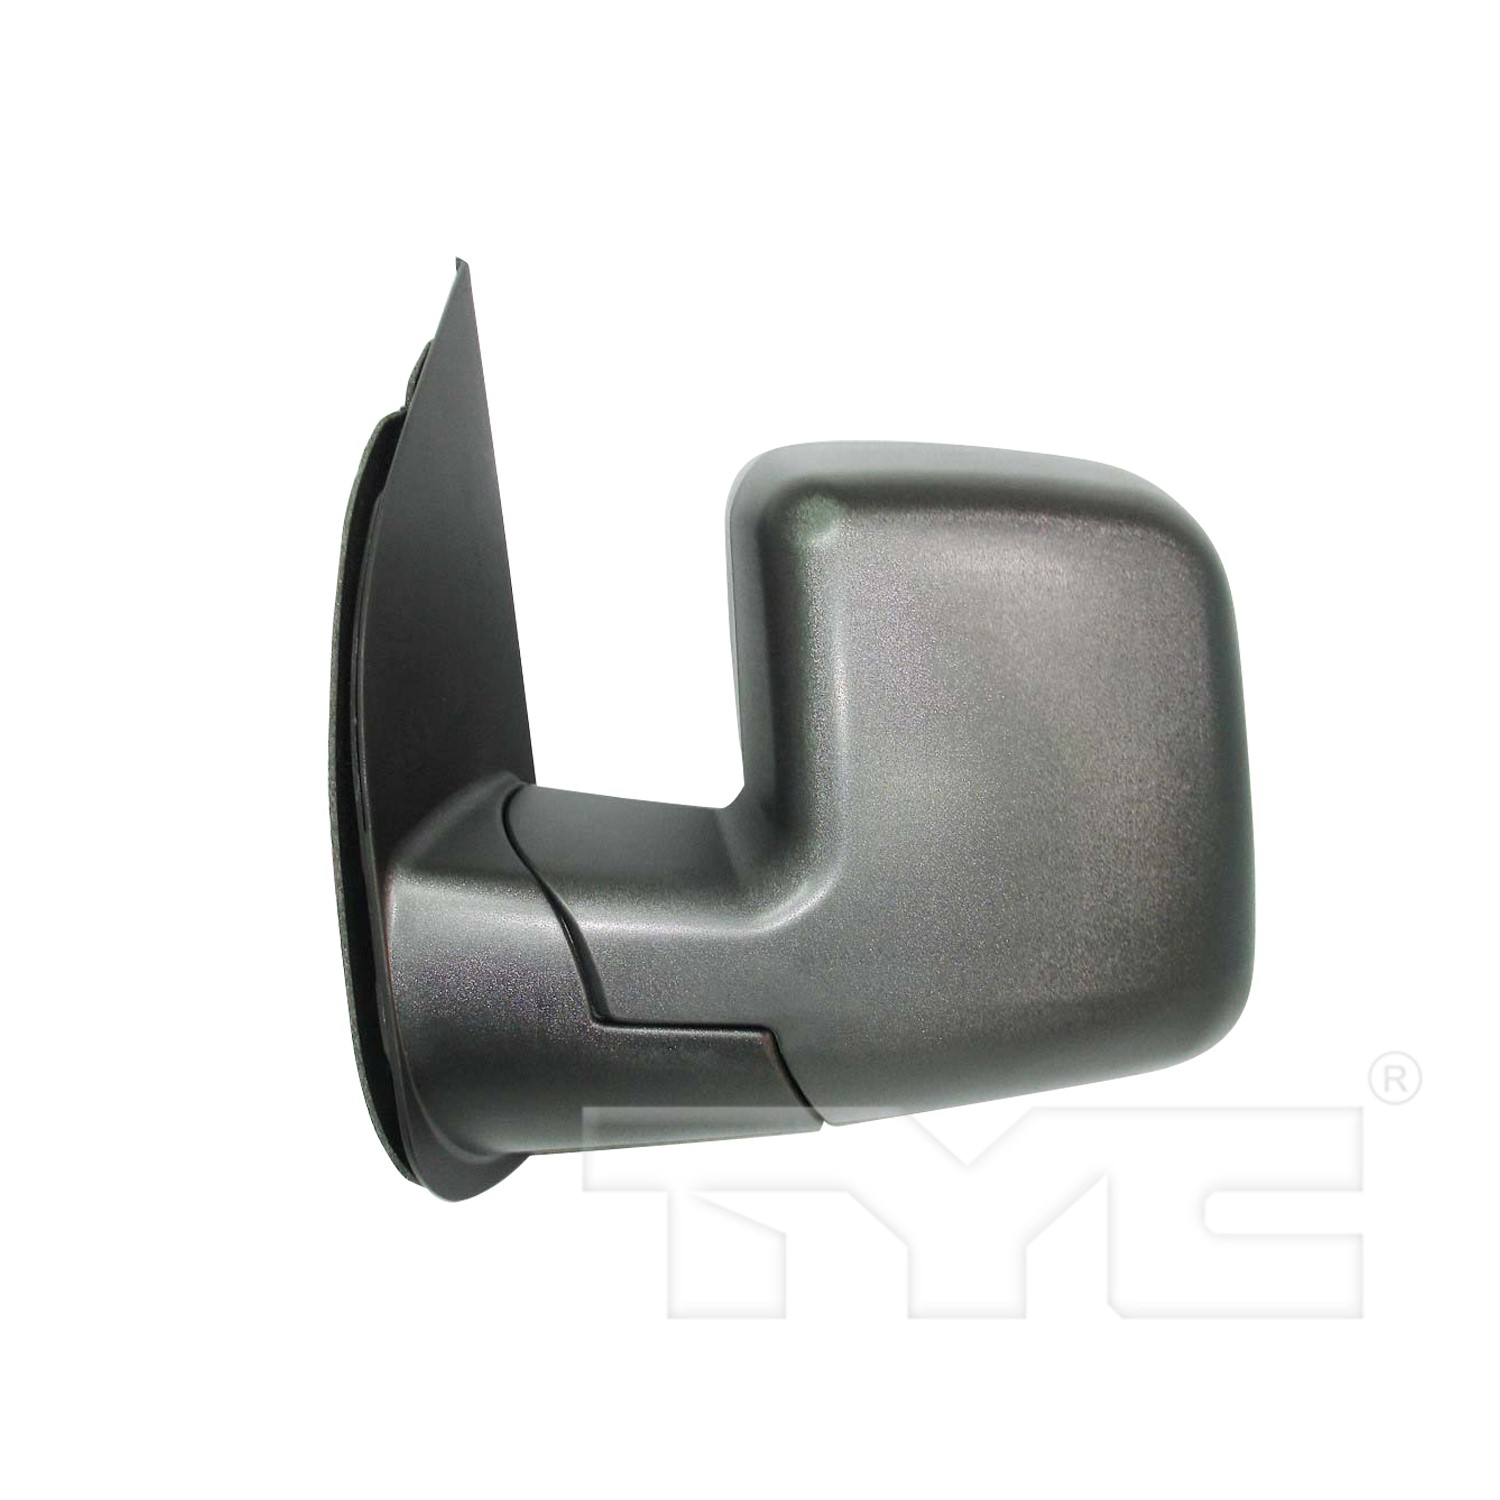 Aftermarket MIRRORS for FORD - E-350 ECONOLINE CLUB WAGON, E-350 ECONOLINE CLUB WAGON,02-02,LT Mirror outside rear view